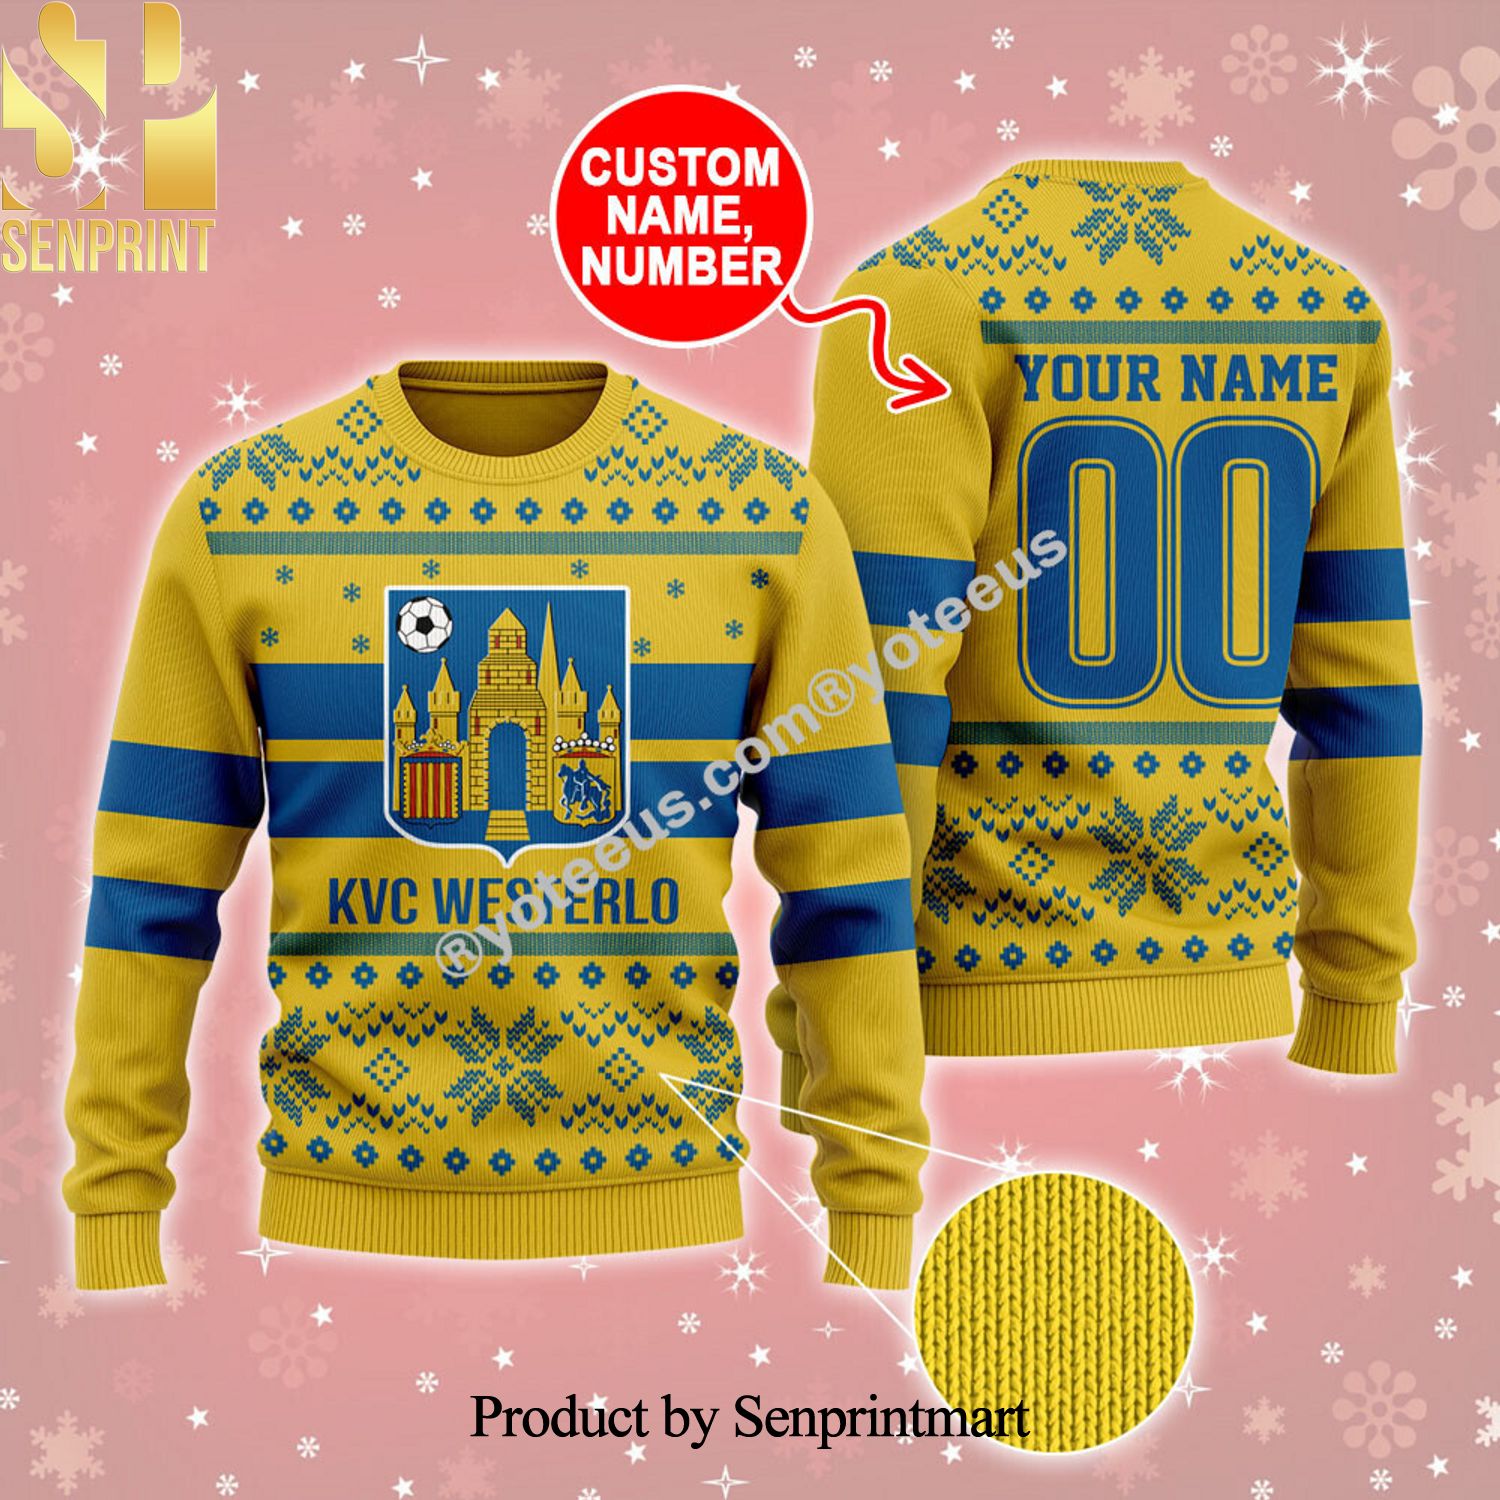 KVC Westerlo Ugly Xmas Wool Knitted Sweater